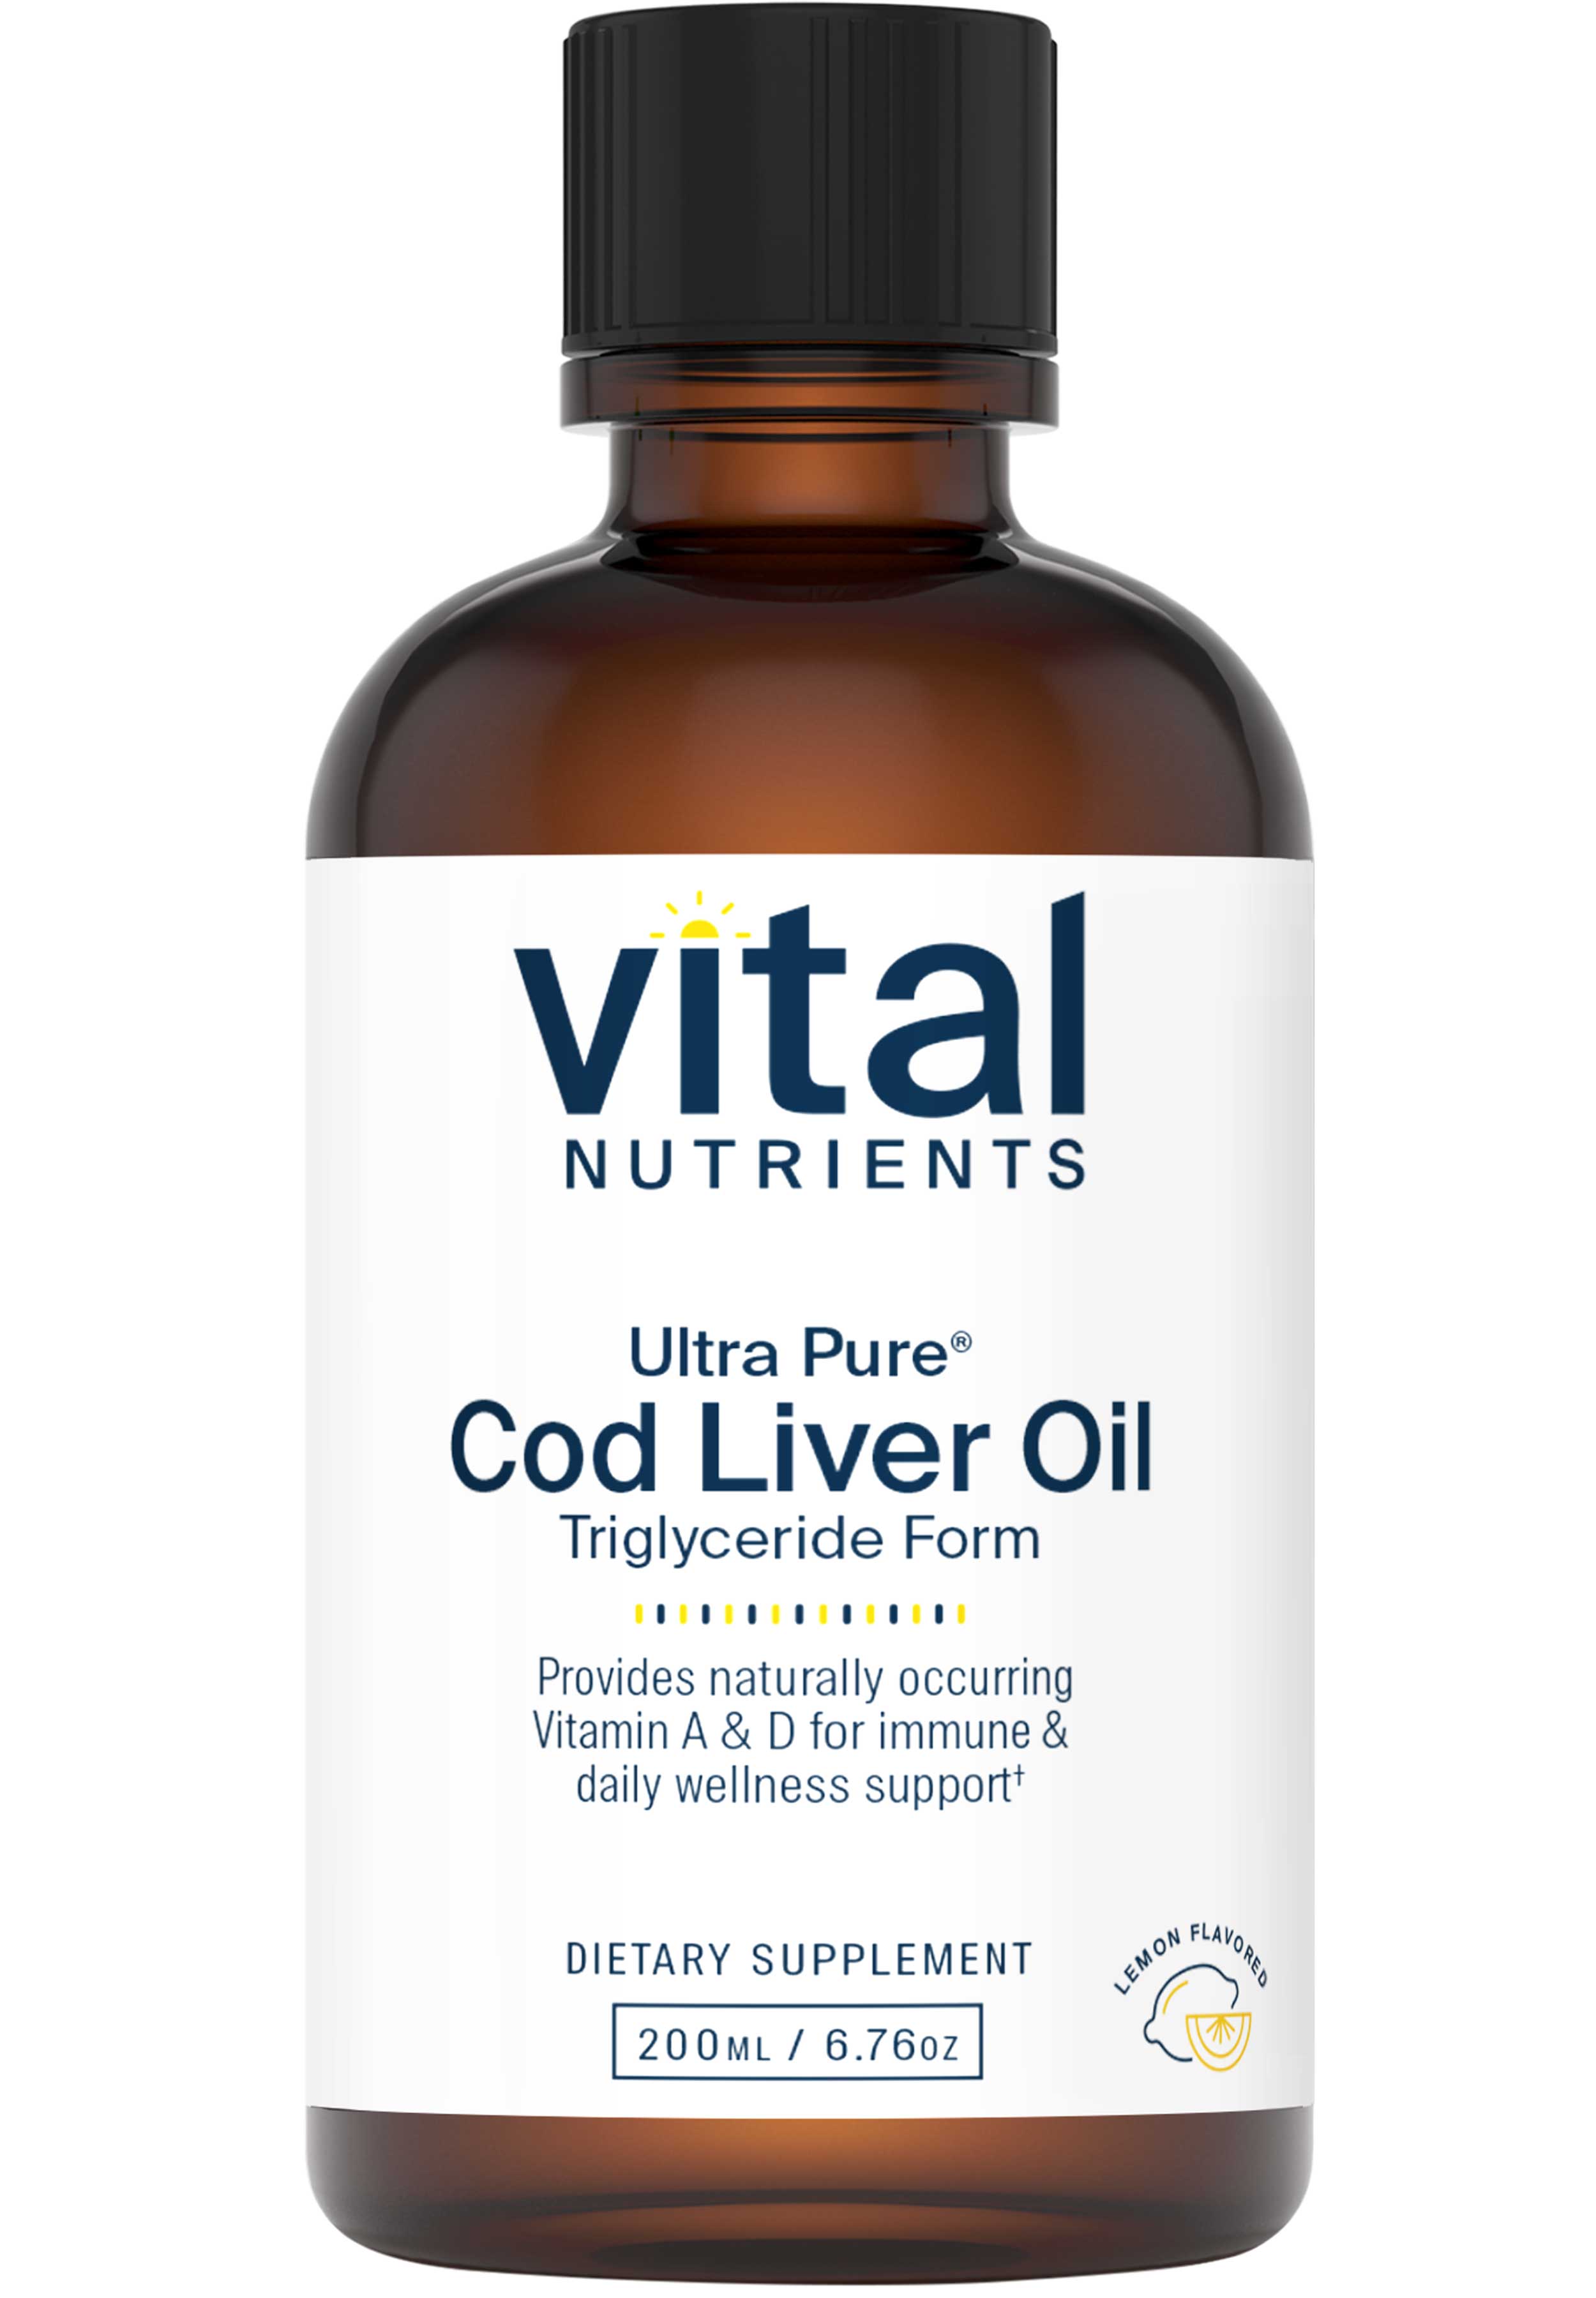 Vital Nutrients Ultra Pure® Cod Liver Oil 1025